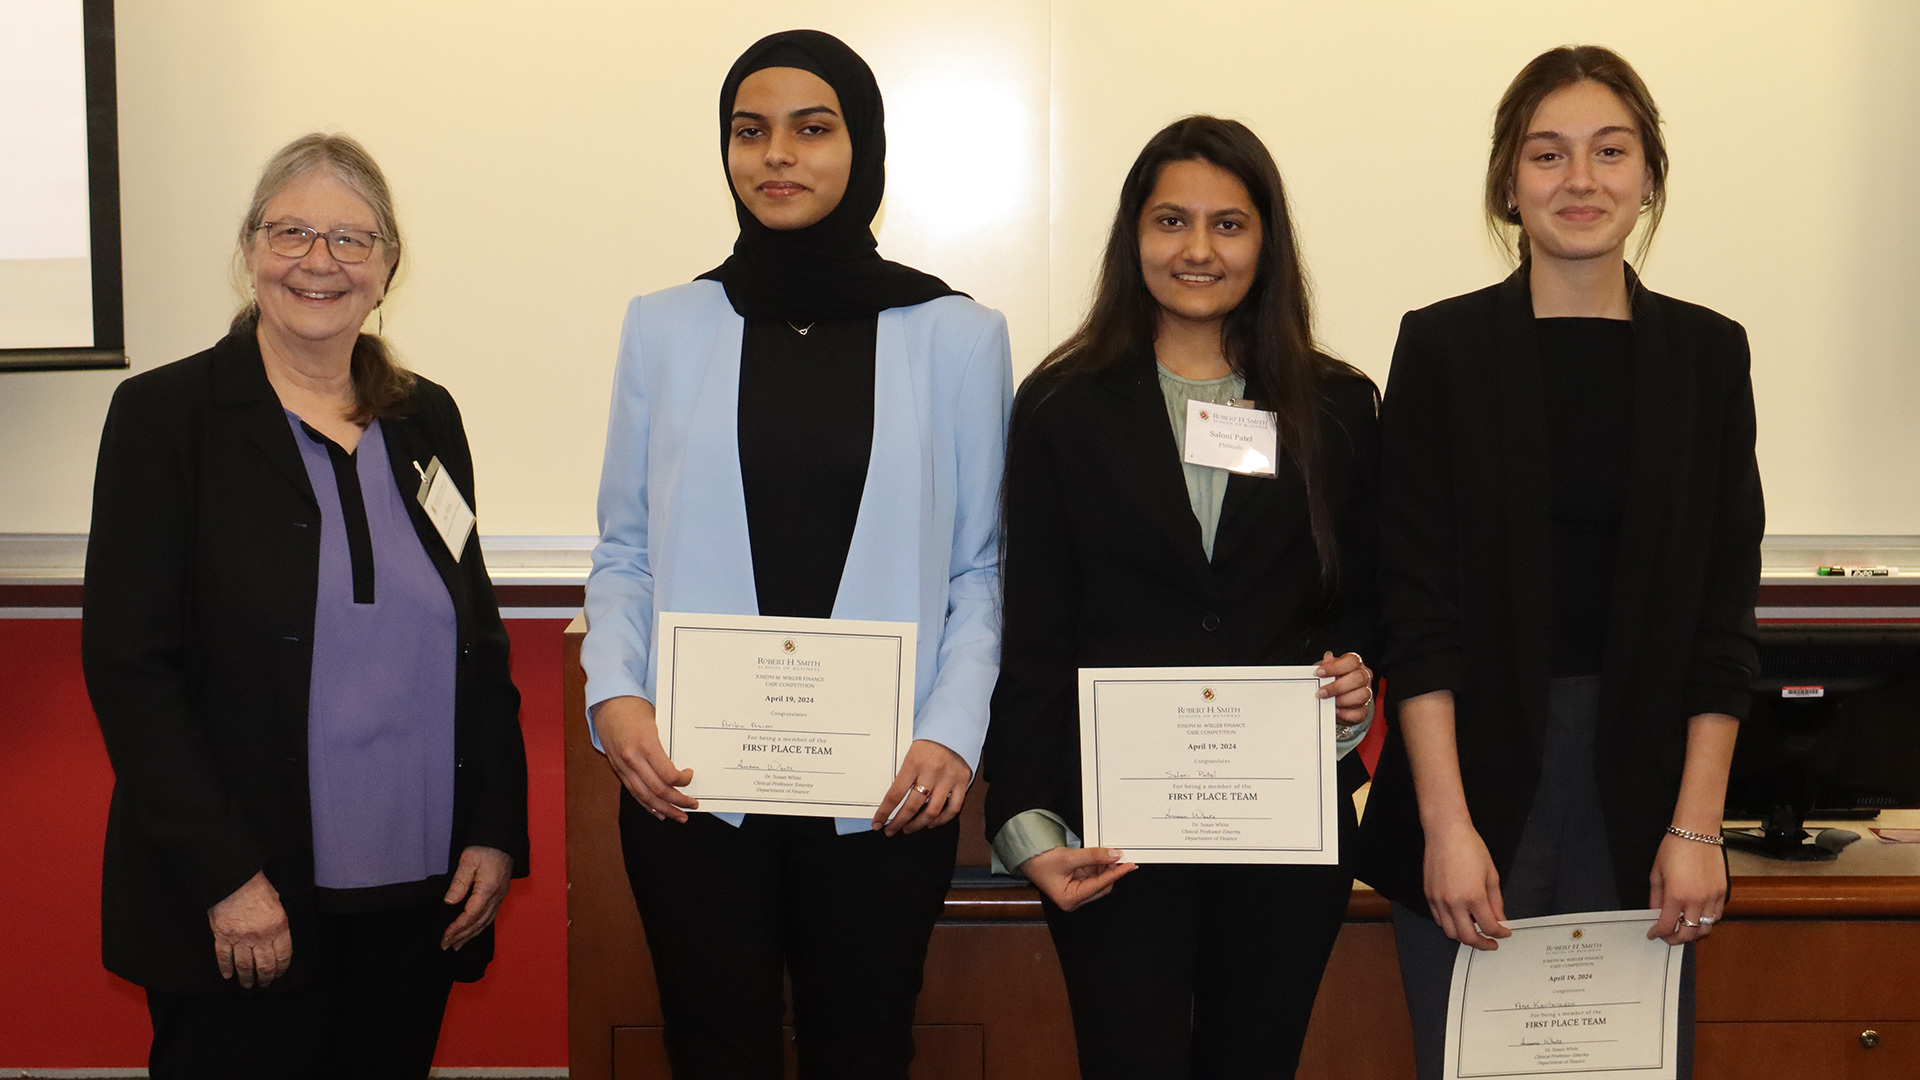 Areeba Asim, Ana Kavtaradze, and Saloni Patel take the top spot with their outstanding performance and innovative solutions, pictured here with Clinical Professor Emerita Susan White.